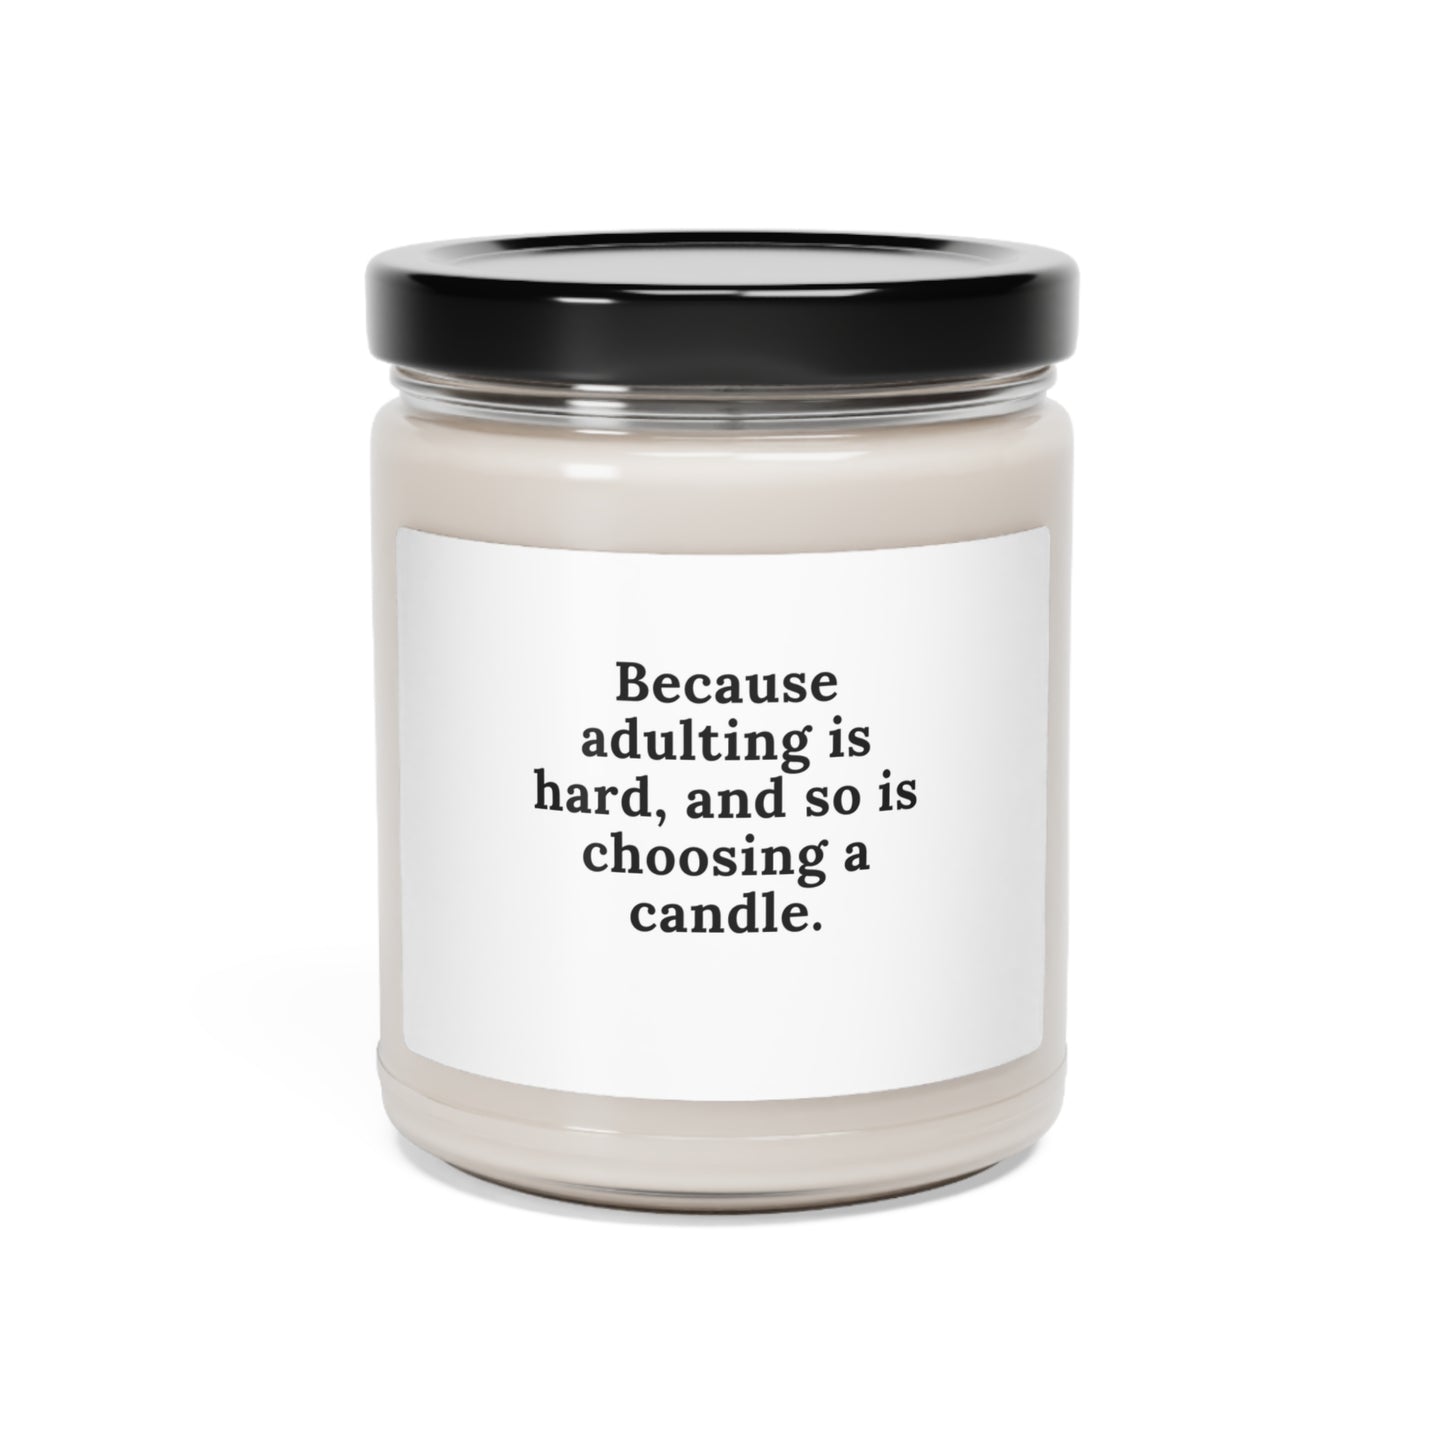 Because adulting is hard, and so is choosing a candle.